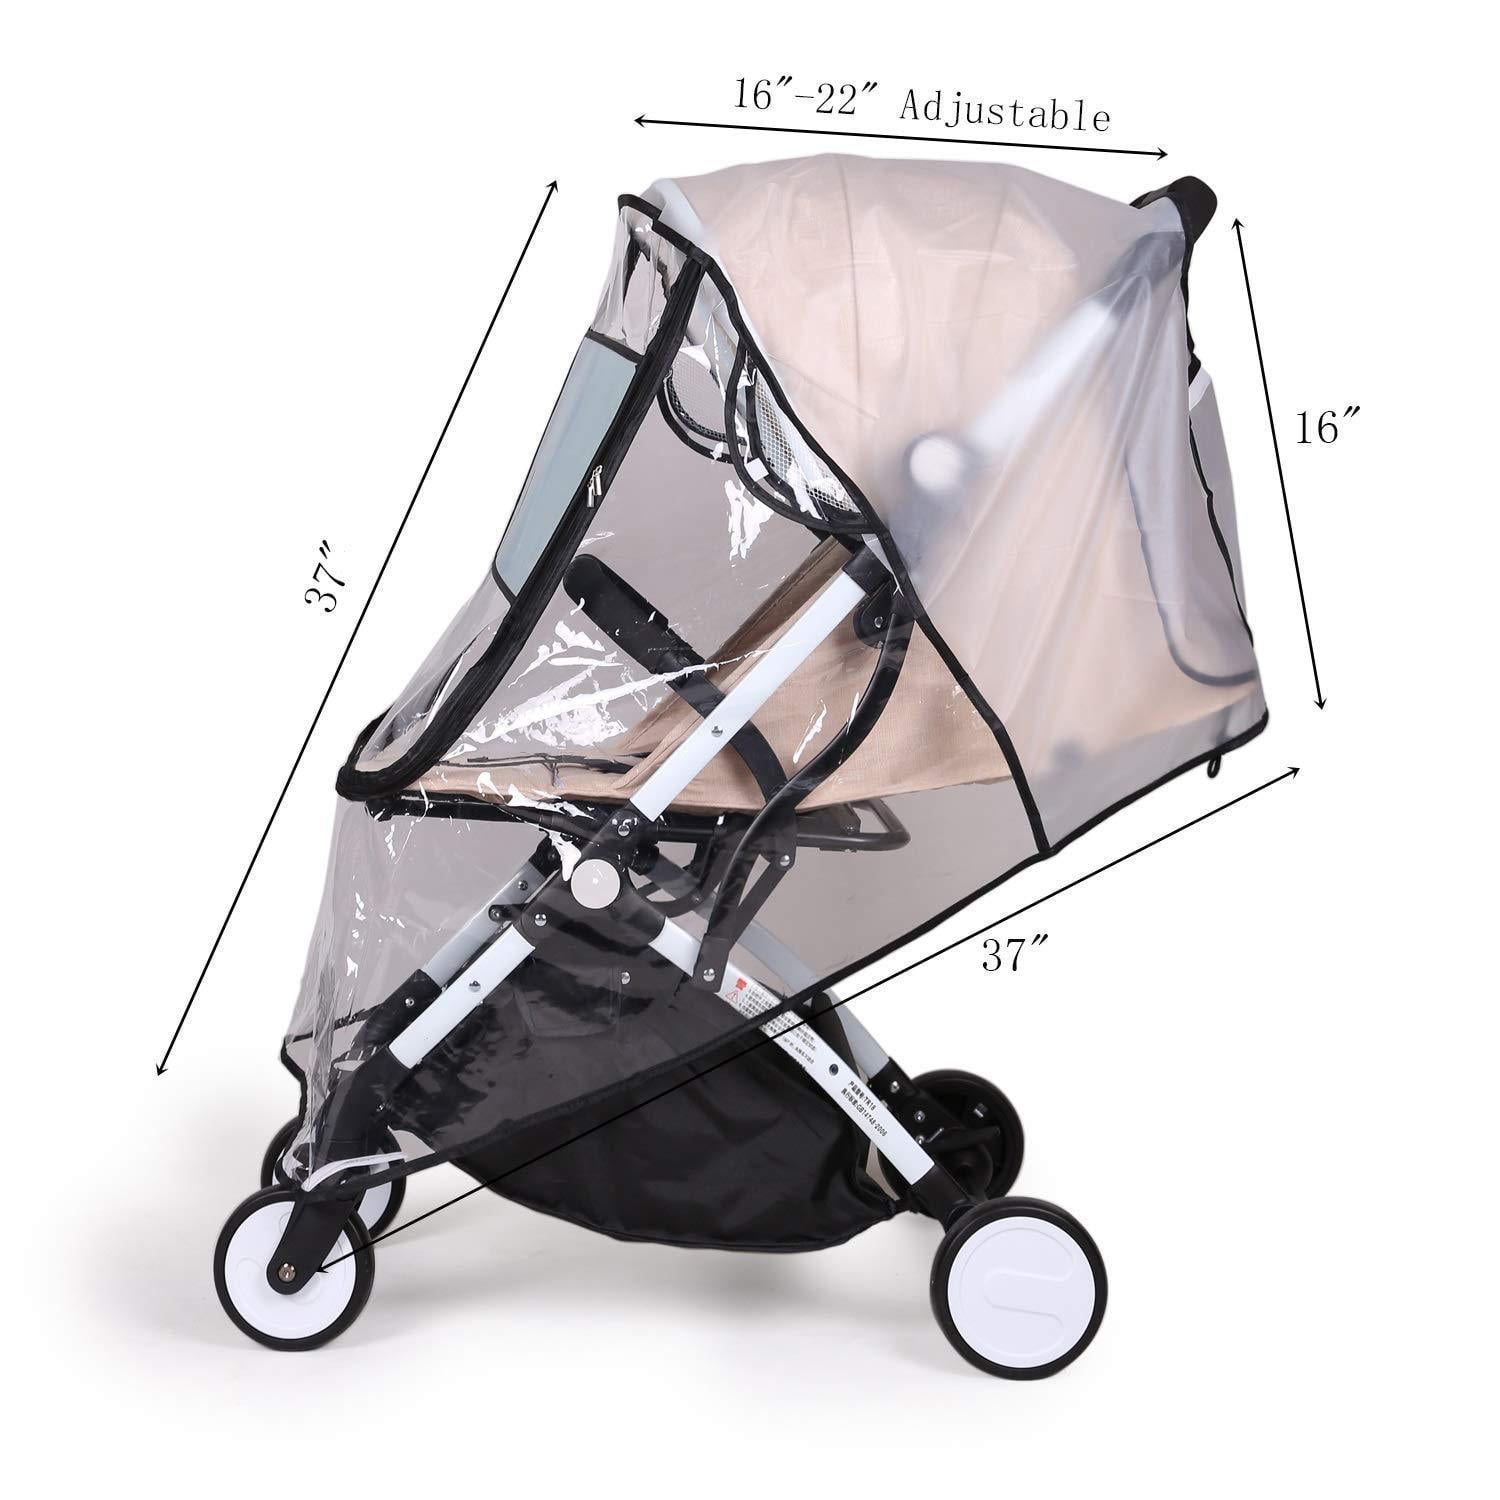 Windproof Waterproof Baby Travel Weather Shield Black First Essentials Stroller Rain Cover Universal Protect from Dust Snow 